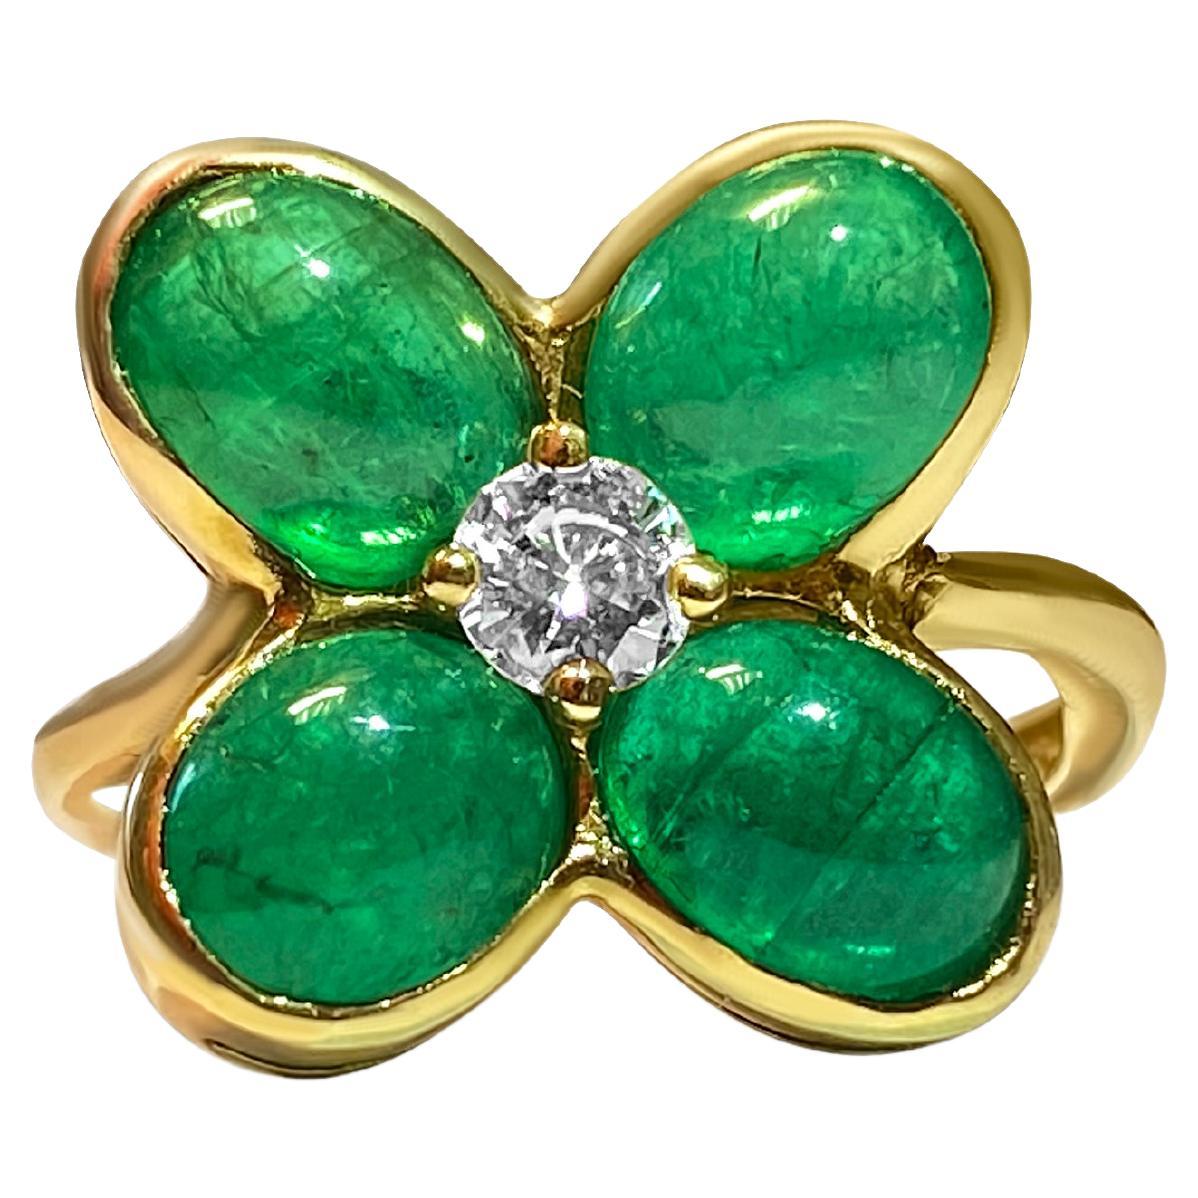 18K Gold, 8.50 CT Emerald and Diamond Ring